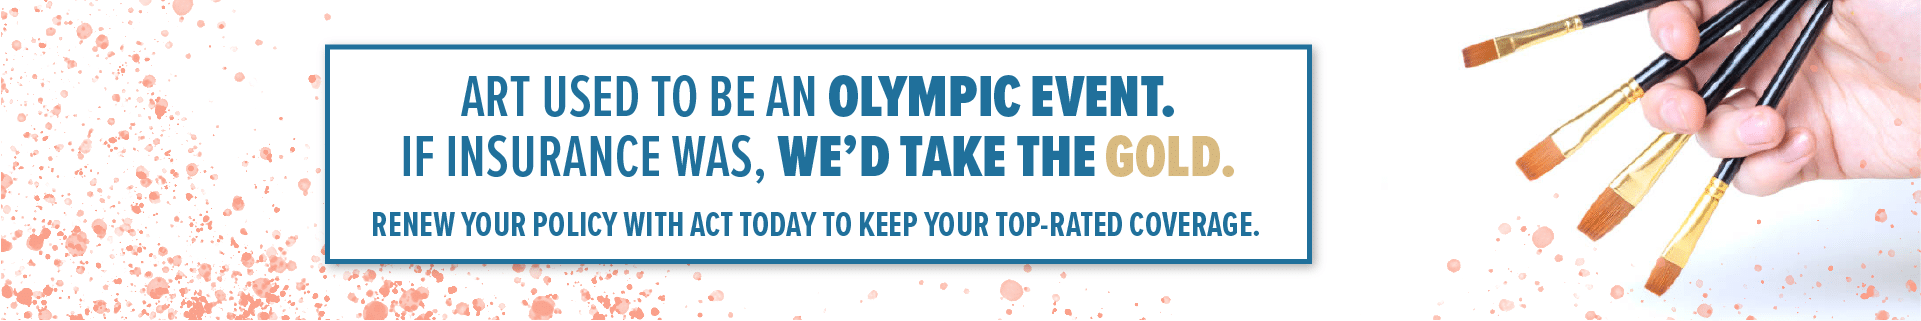 Art used to be an olympic event. If insurance was, we'd take the gold. Renew your policy with ACT today to keep your top-rated coverage.